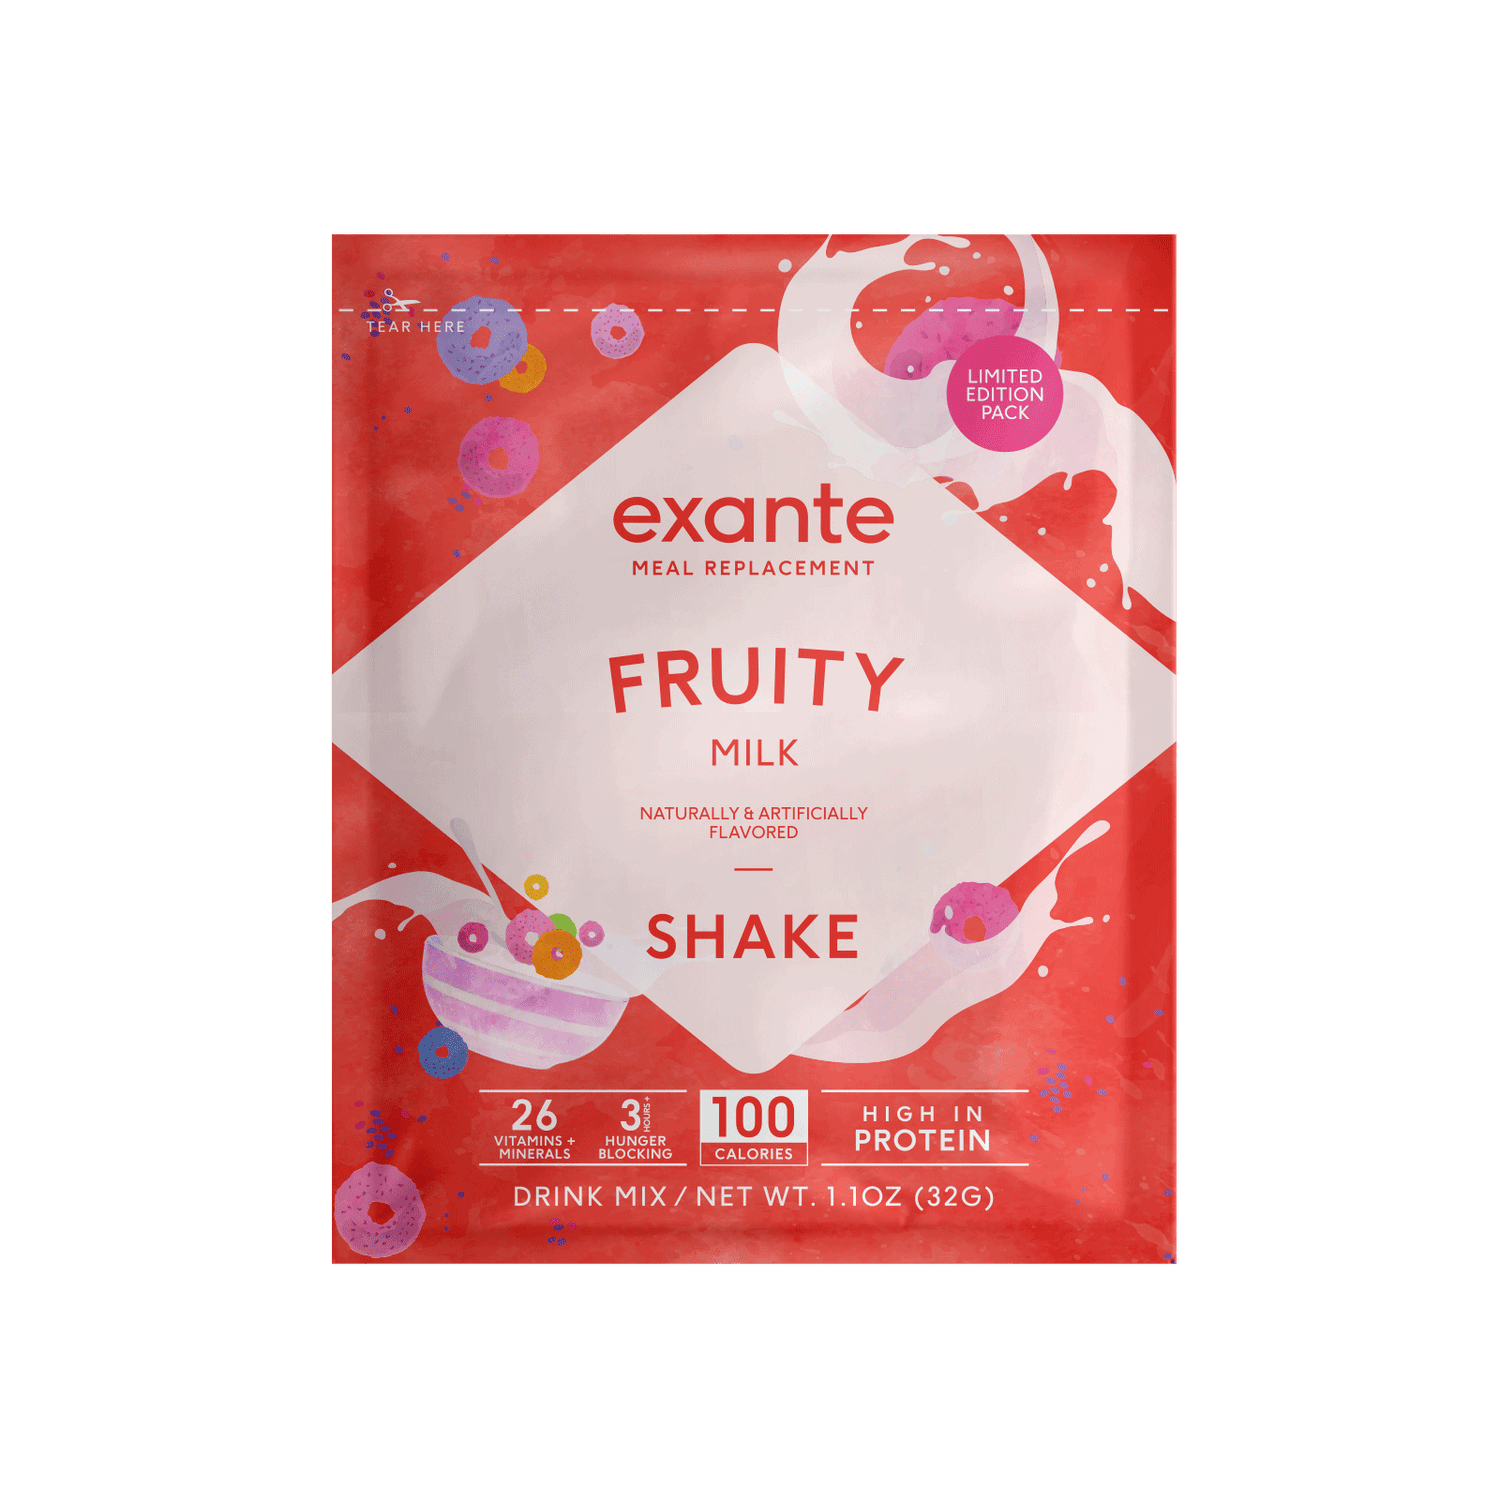 Exante Diet Meal Replacement Shake Fruity Cereal - Sample (USA)